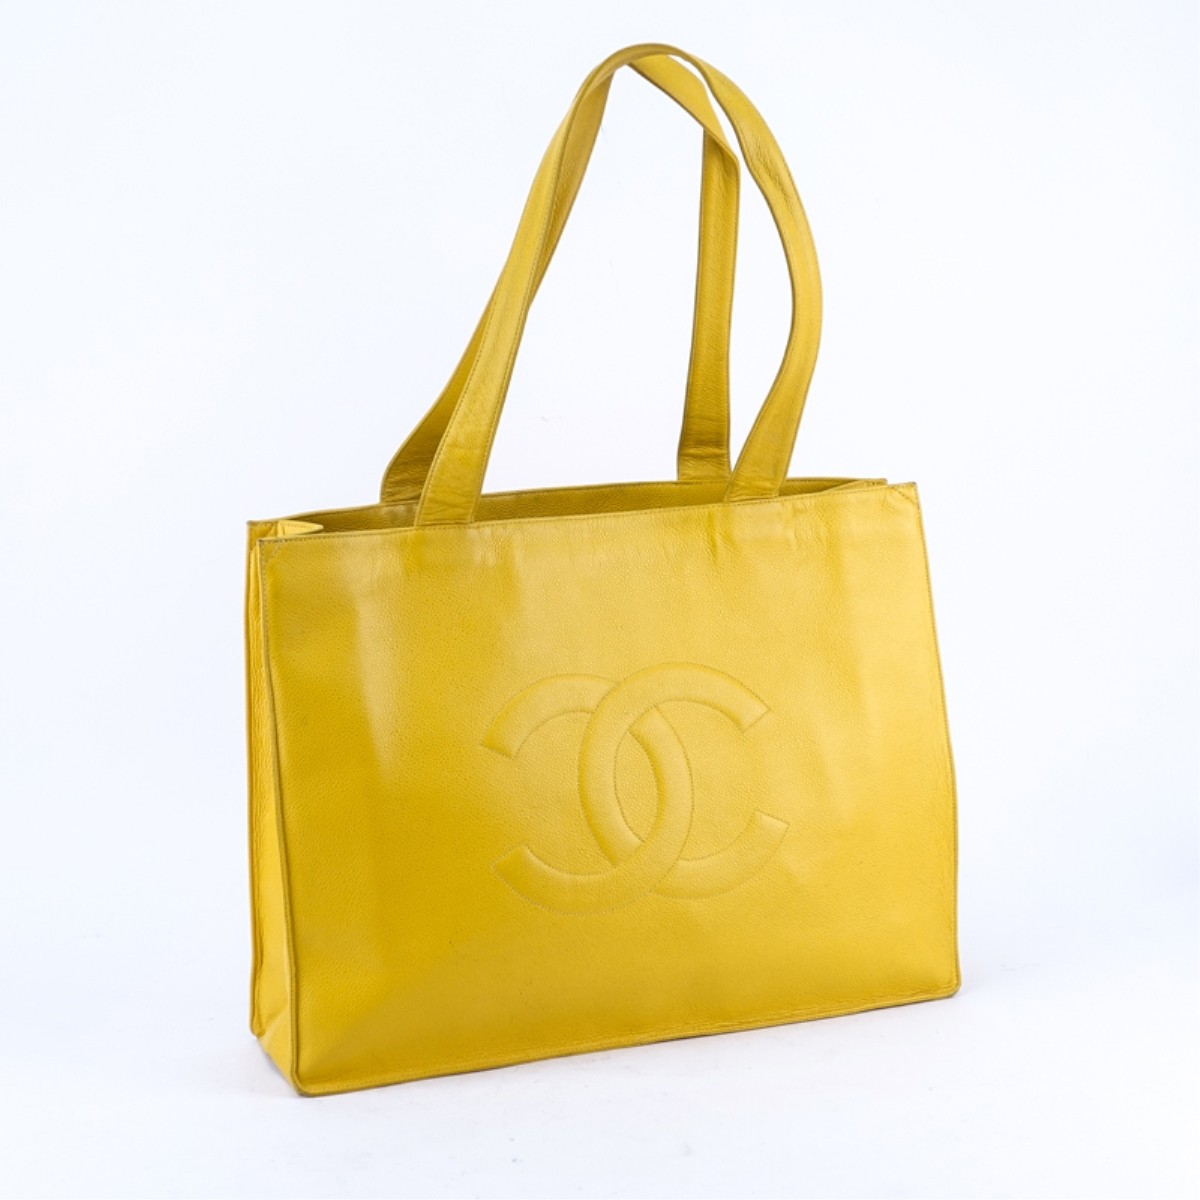 Chanel Yellow Caviar Leather Vintage Tote